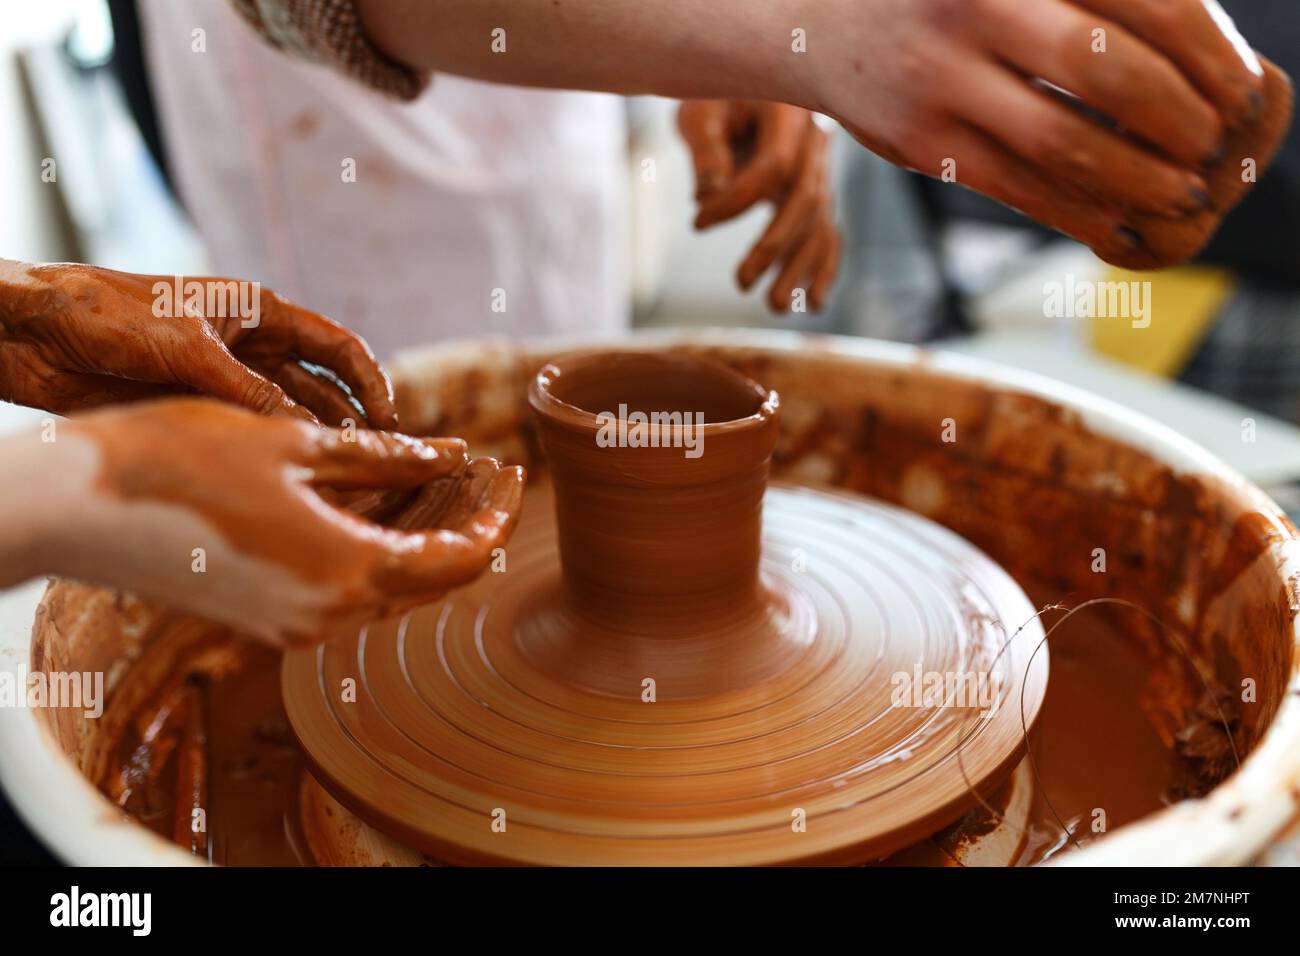 Cropped Image of Unrecognizable Female Ceramics Maker working with Pottery Wheel in Cozy Workshop Makes a Future Vase or Mug,Creative People Handcraft Stock Photo